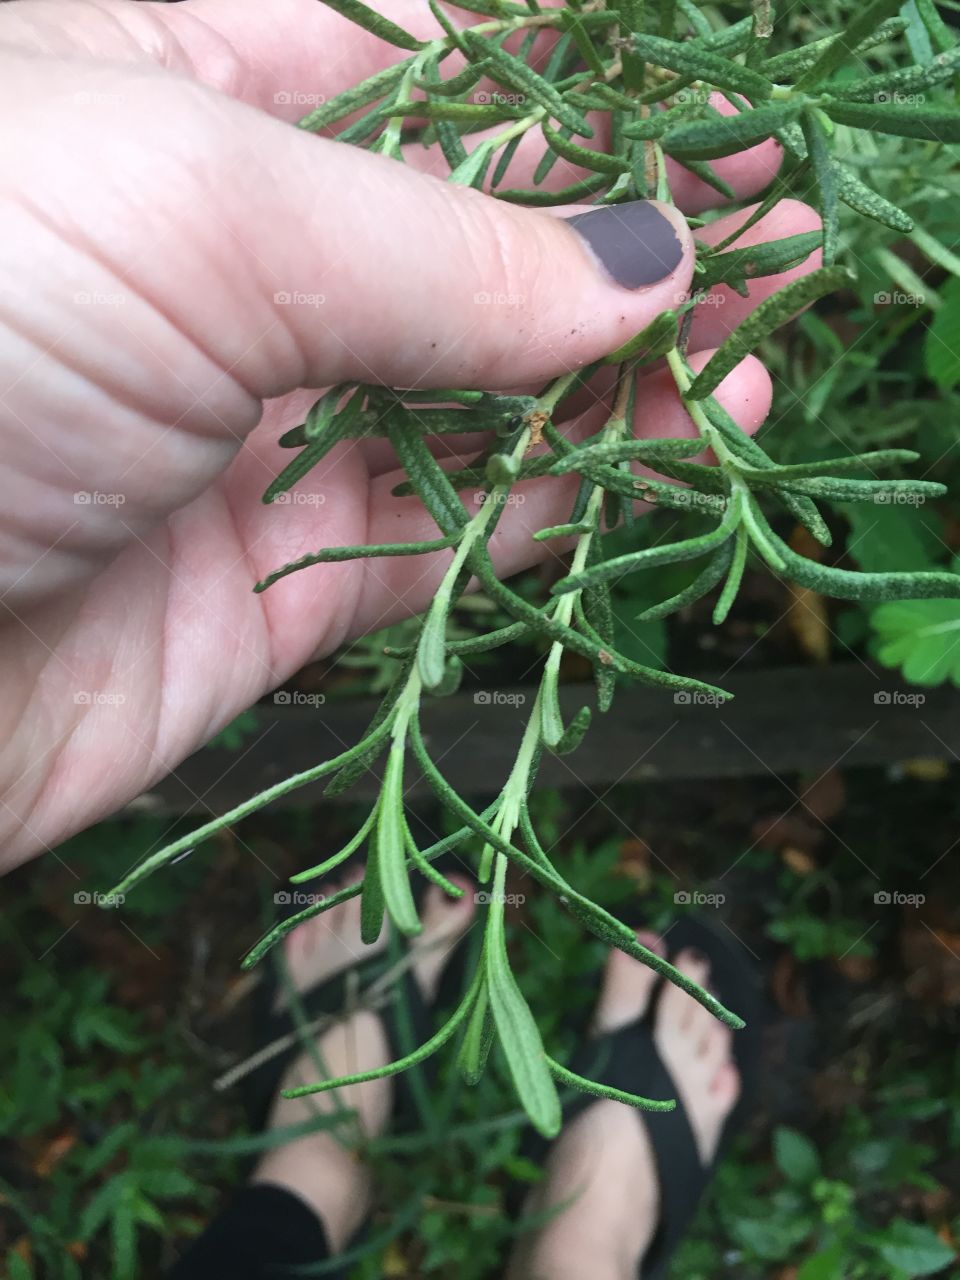 Pruning my Rosemary plant in the garden. This is my happy place. 